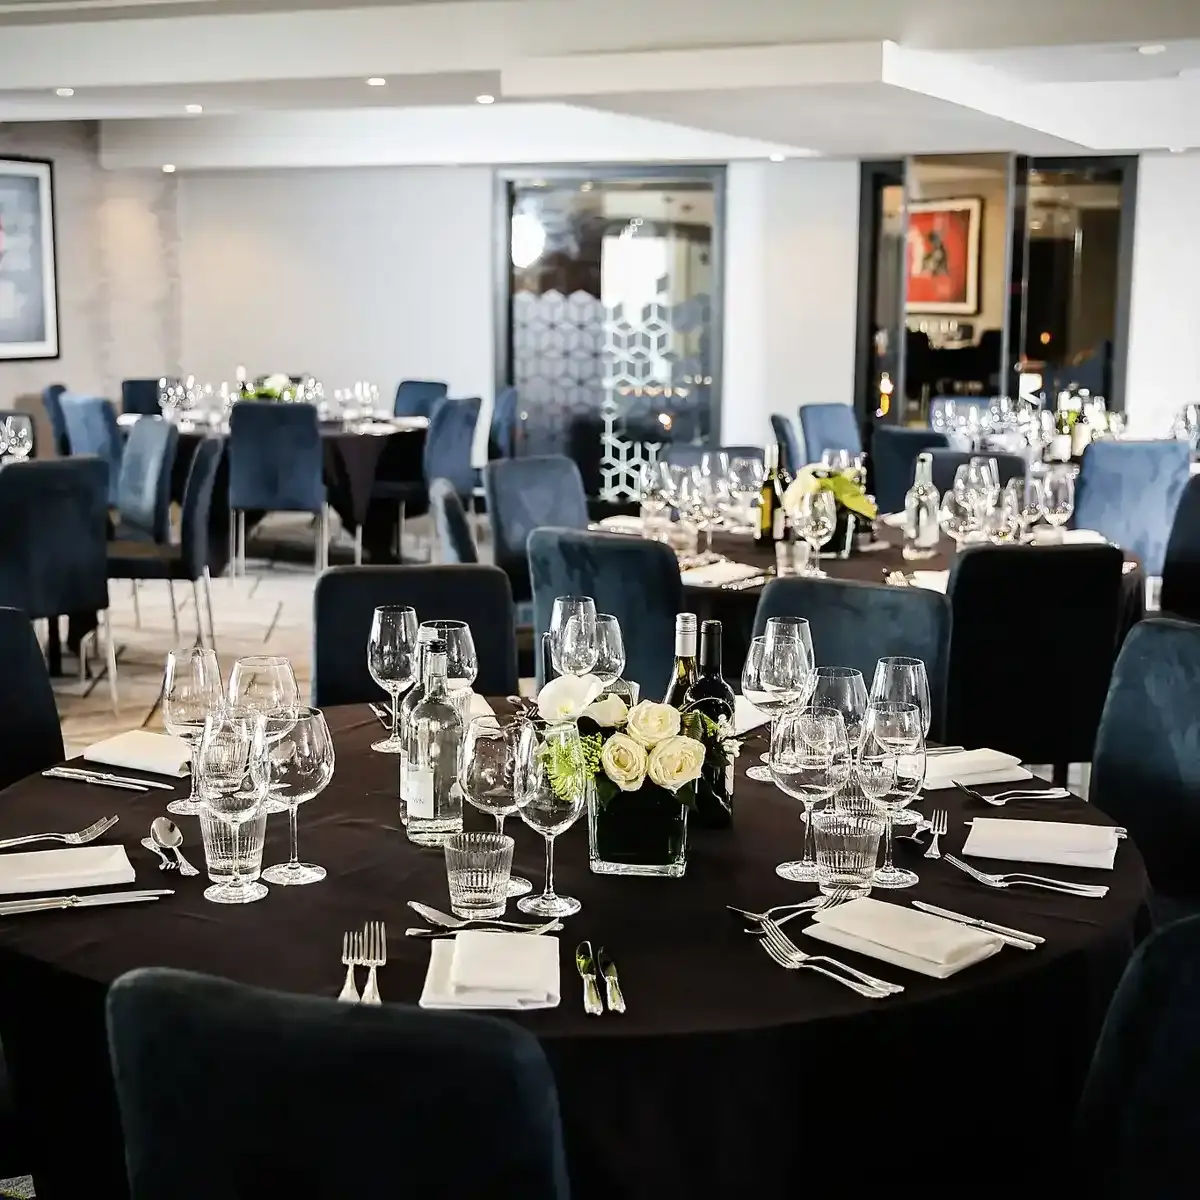 Malmaison Birmingham Private Dining Table set for a formal dinner with blue chairs.